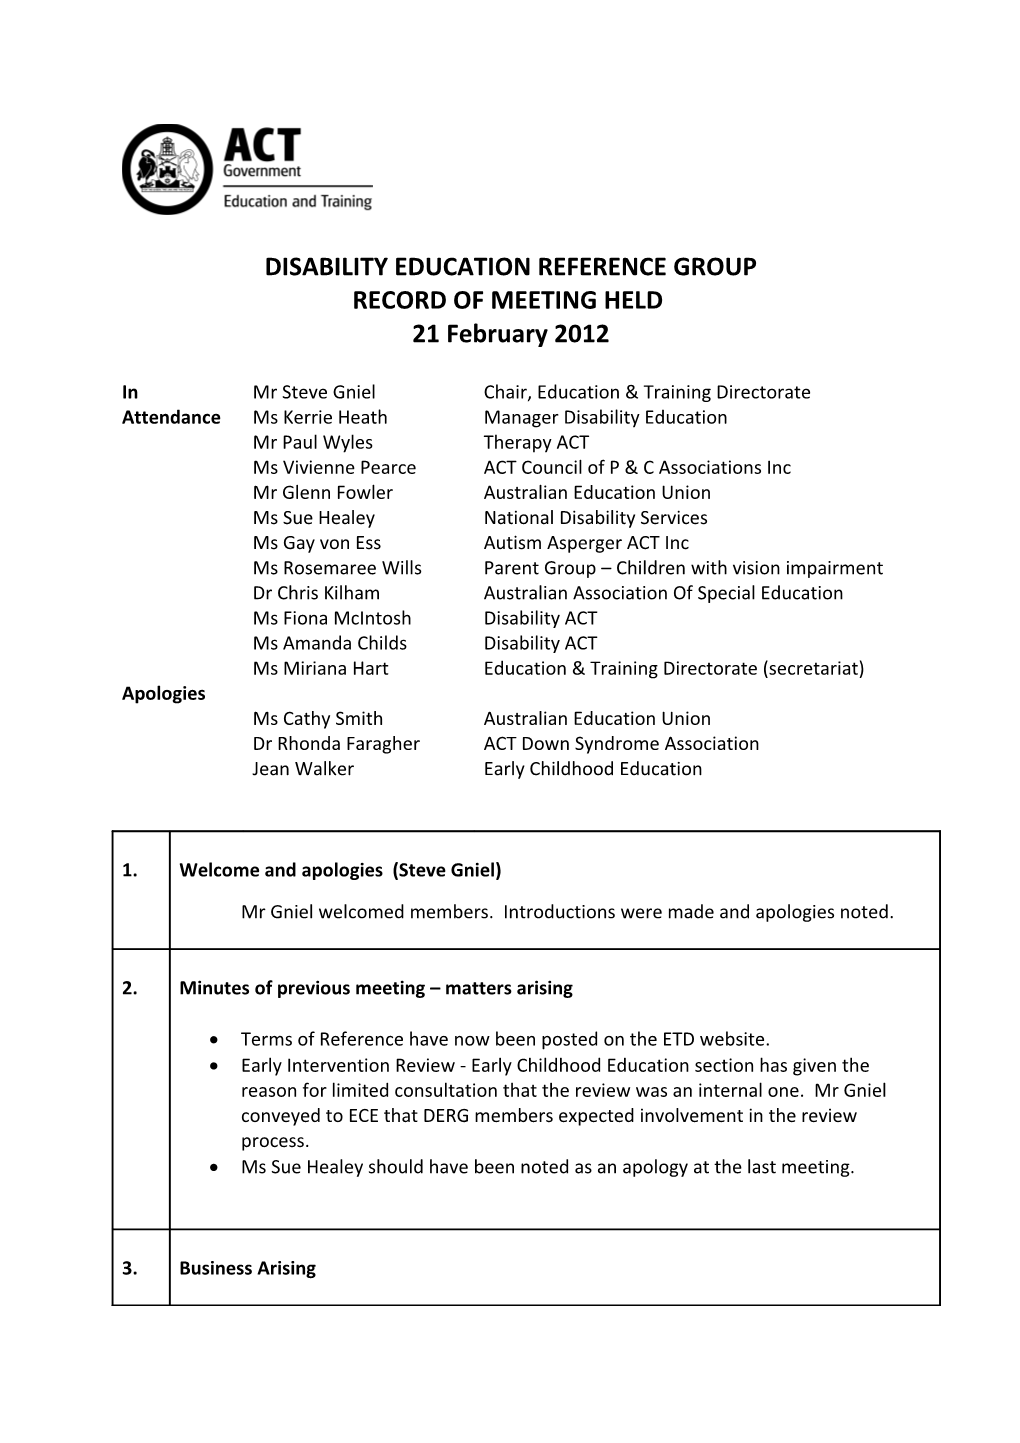 Disability Educaiton Reference Group Minutes 21February 2012